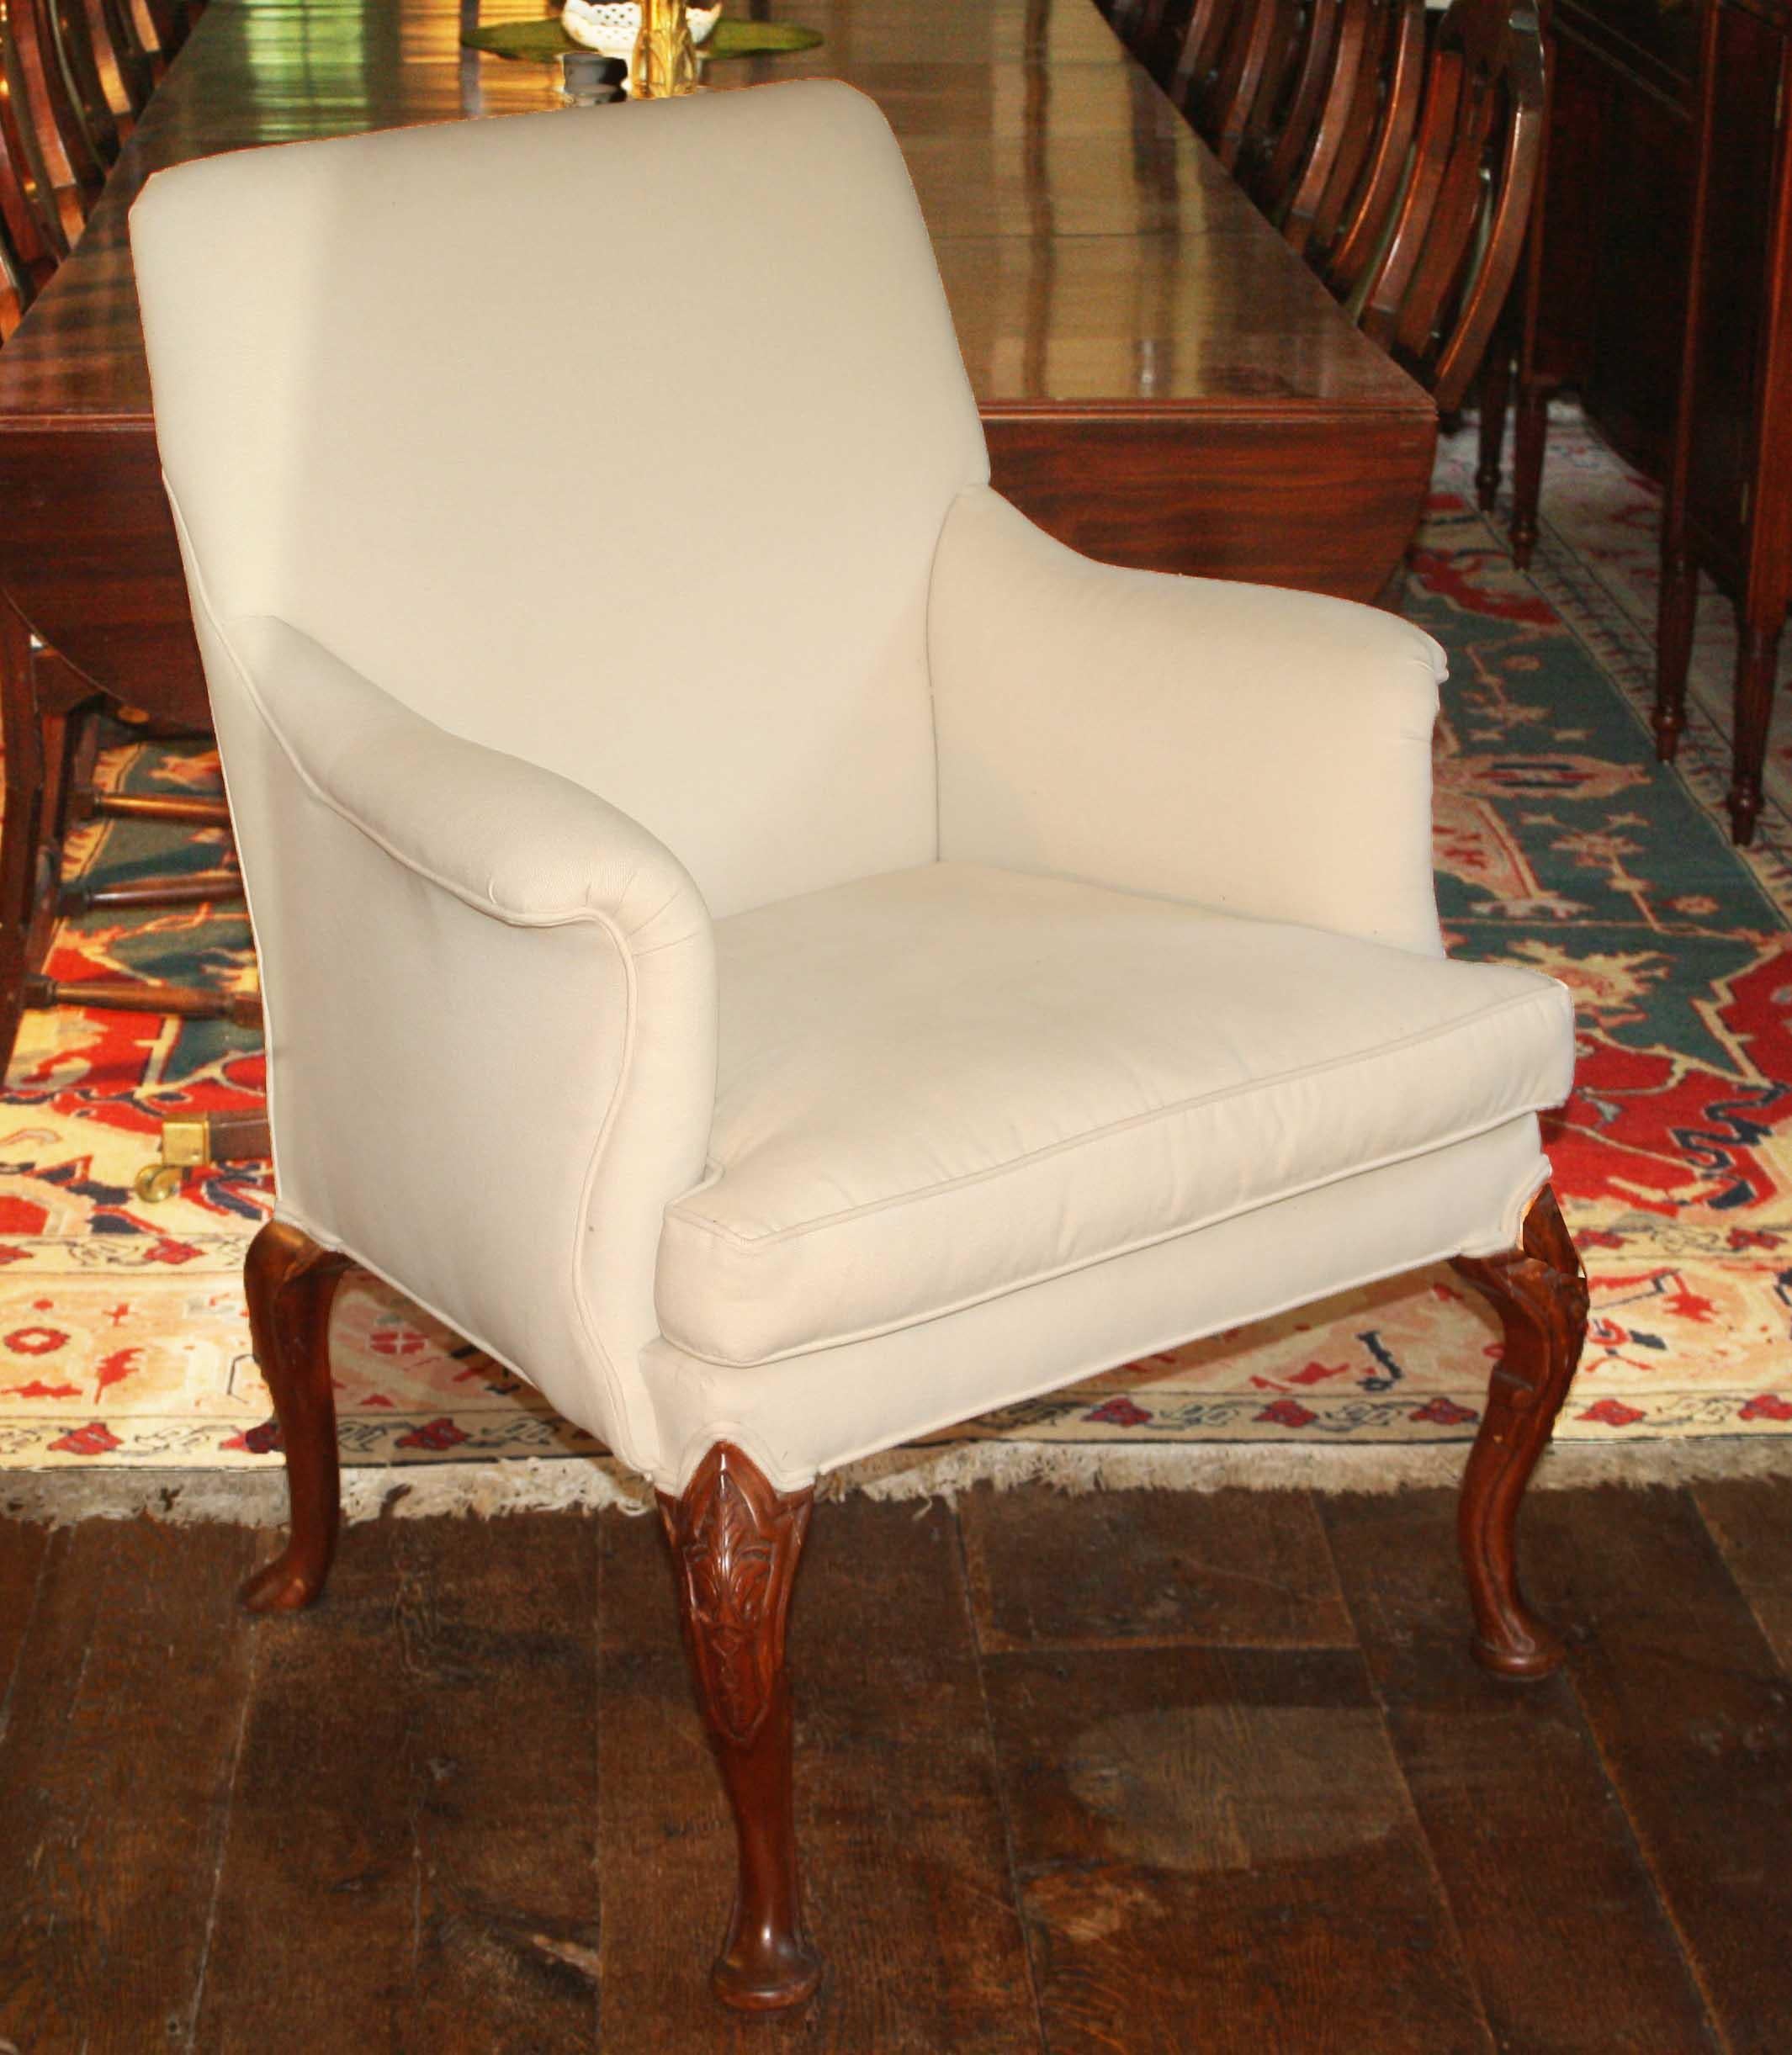 An English upholstered armchair from the later years of the reign of George II, circa 1750.
Particularly refined shape and proportions to the upholstered structure, with a removable
cushion seat.  Intricately carved walnut cabriole front legs and